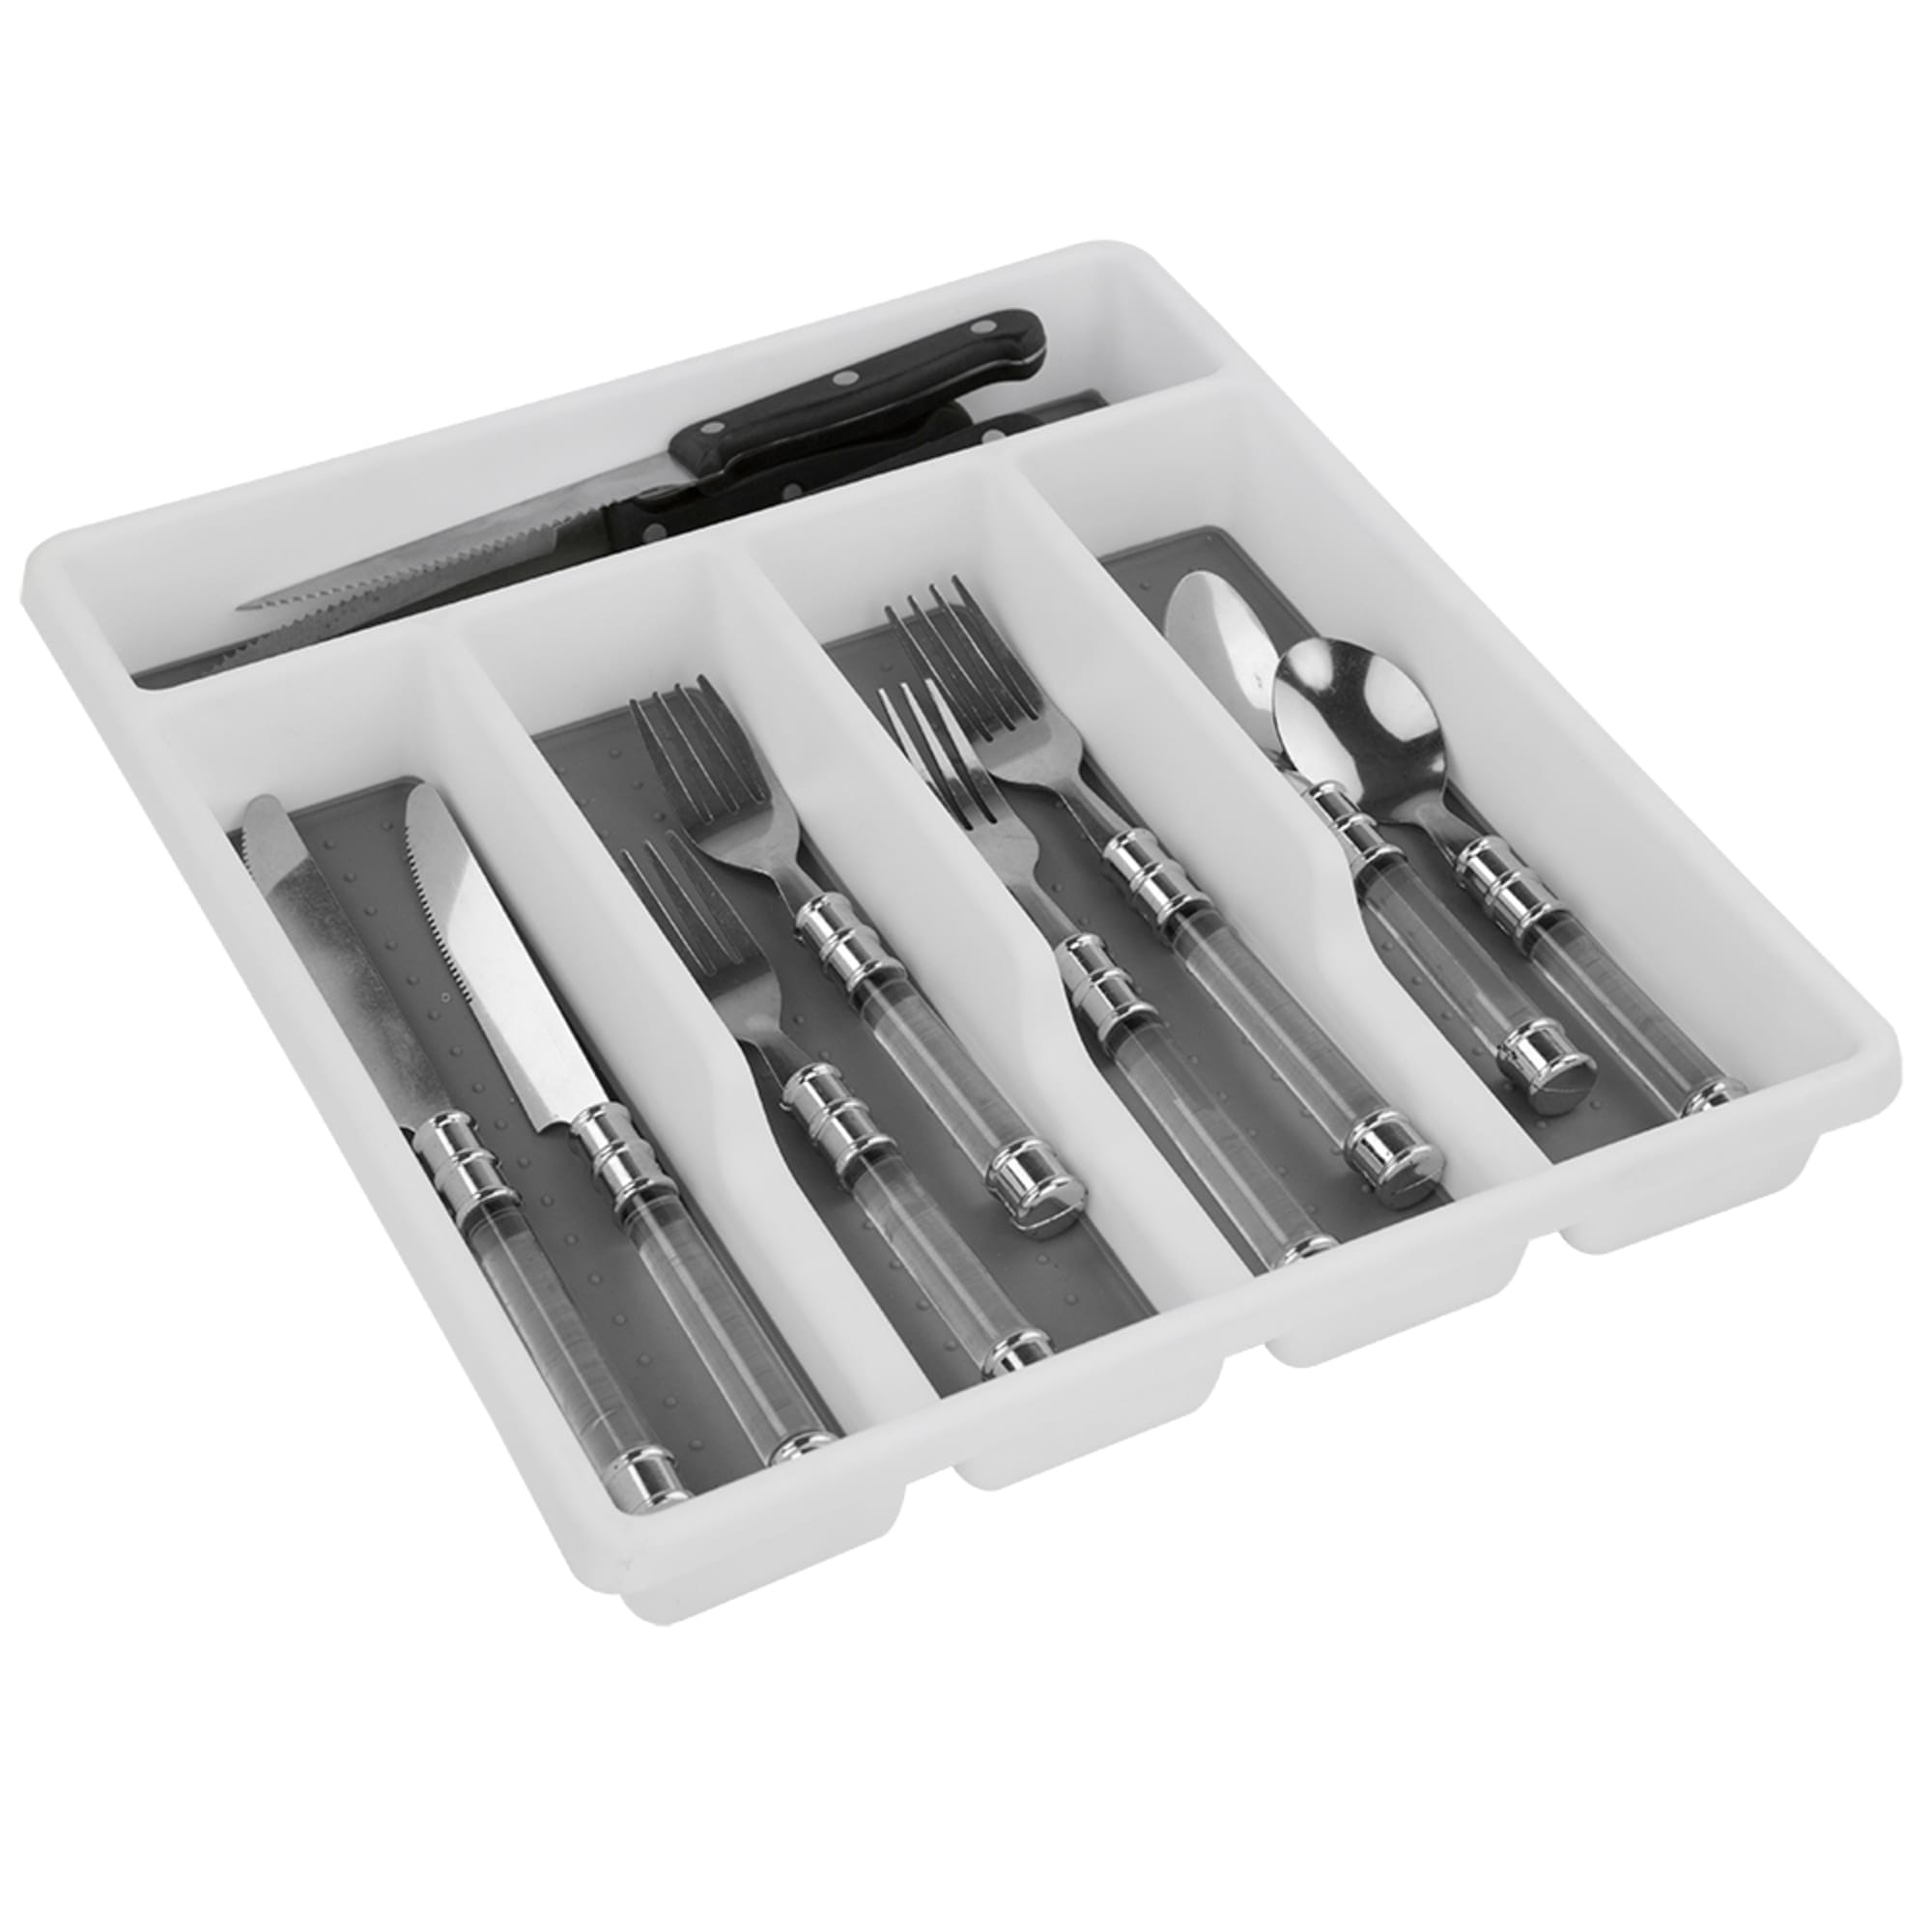 Home Basics Large Cutlery Tray with Rubber Lined Compartments, White $6.50 EACH, CASE PACK OF 12